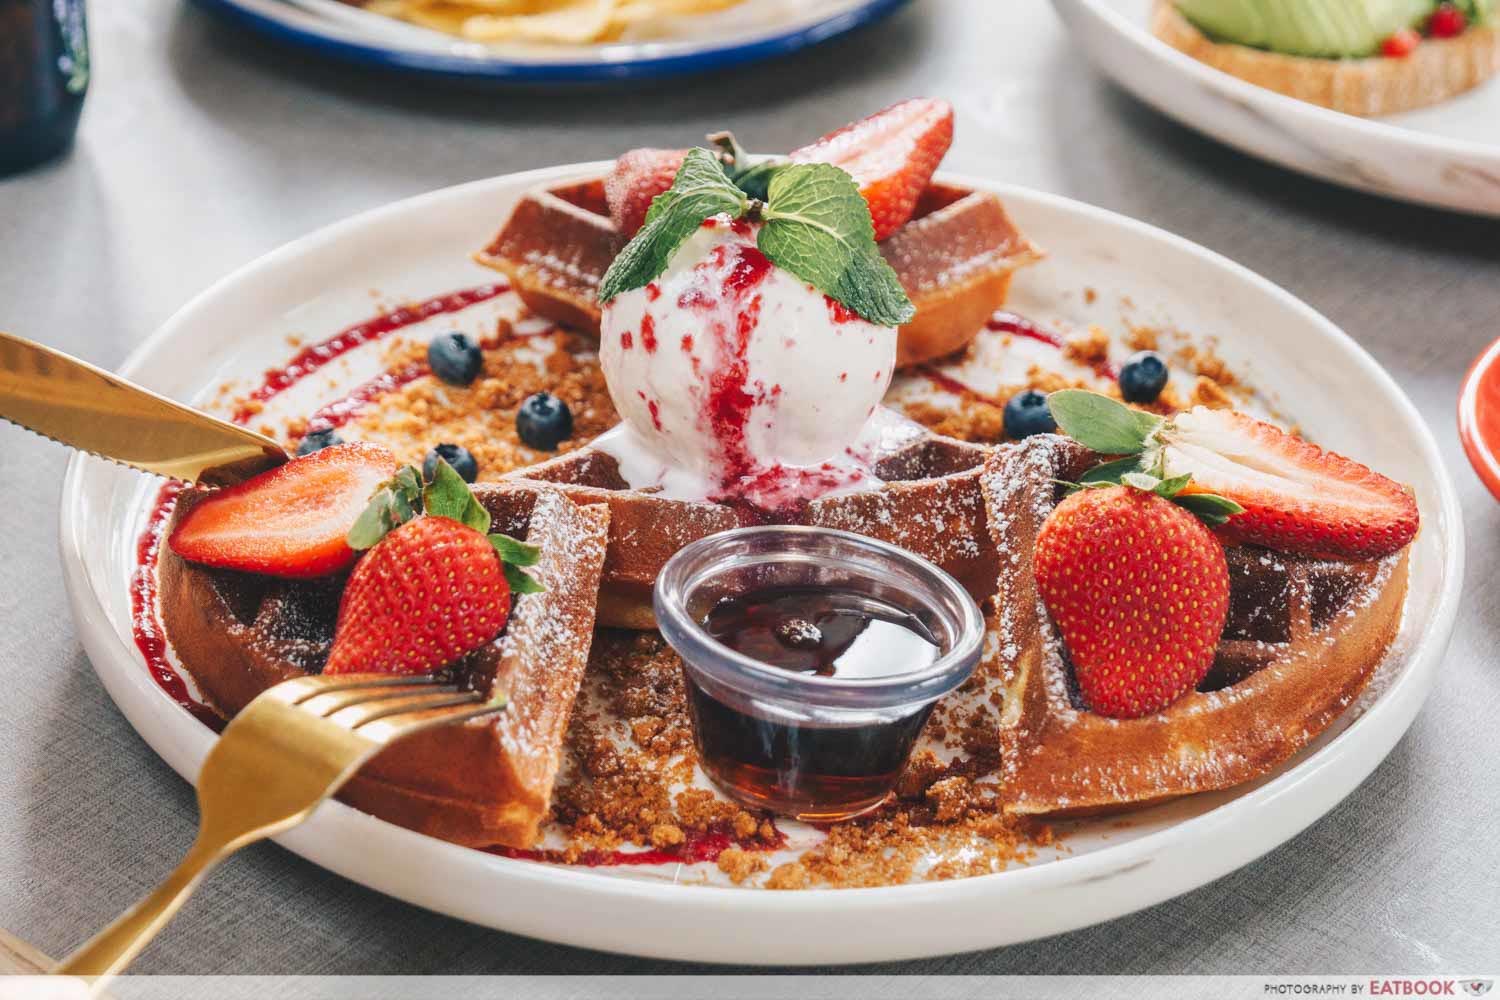 Cafe Coco - fresh berries brown butter waffles